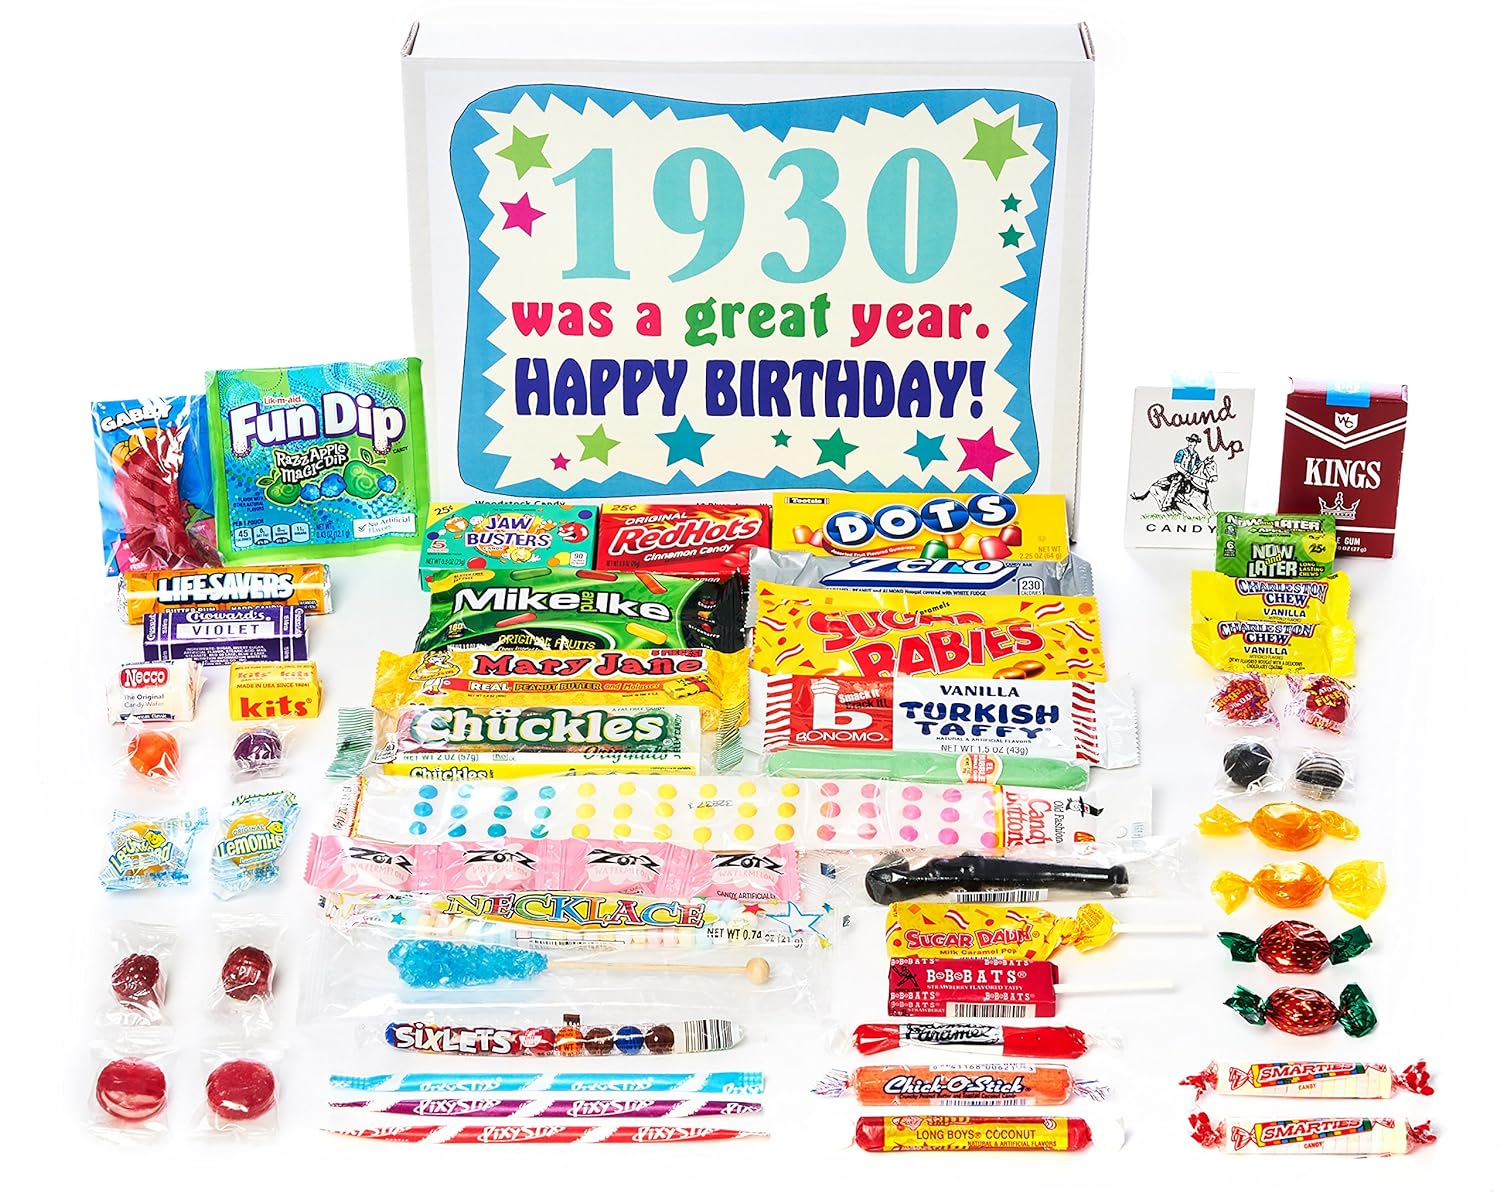 Woodstock Candy ~ 1930 90th Birthday Gift Box of Nostalgic Retro Candy from Childhood for 90 Year Old Man or Woman Born 1930